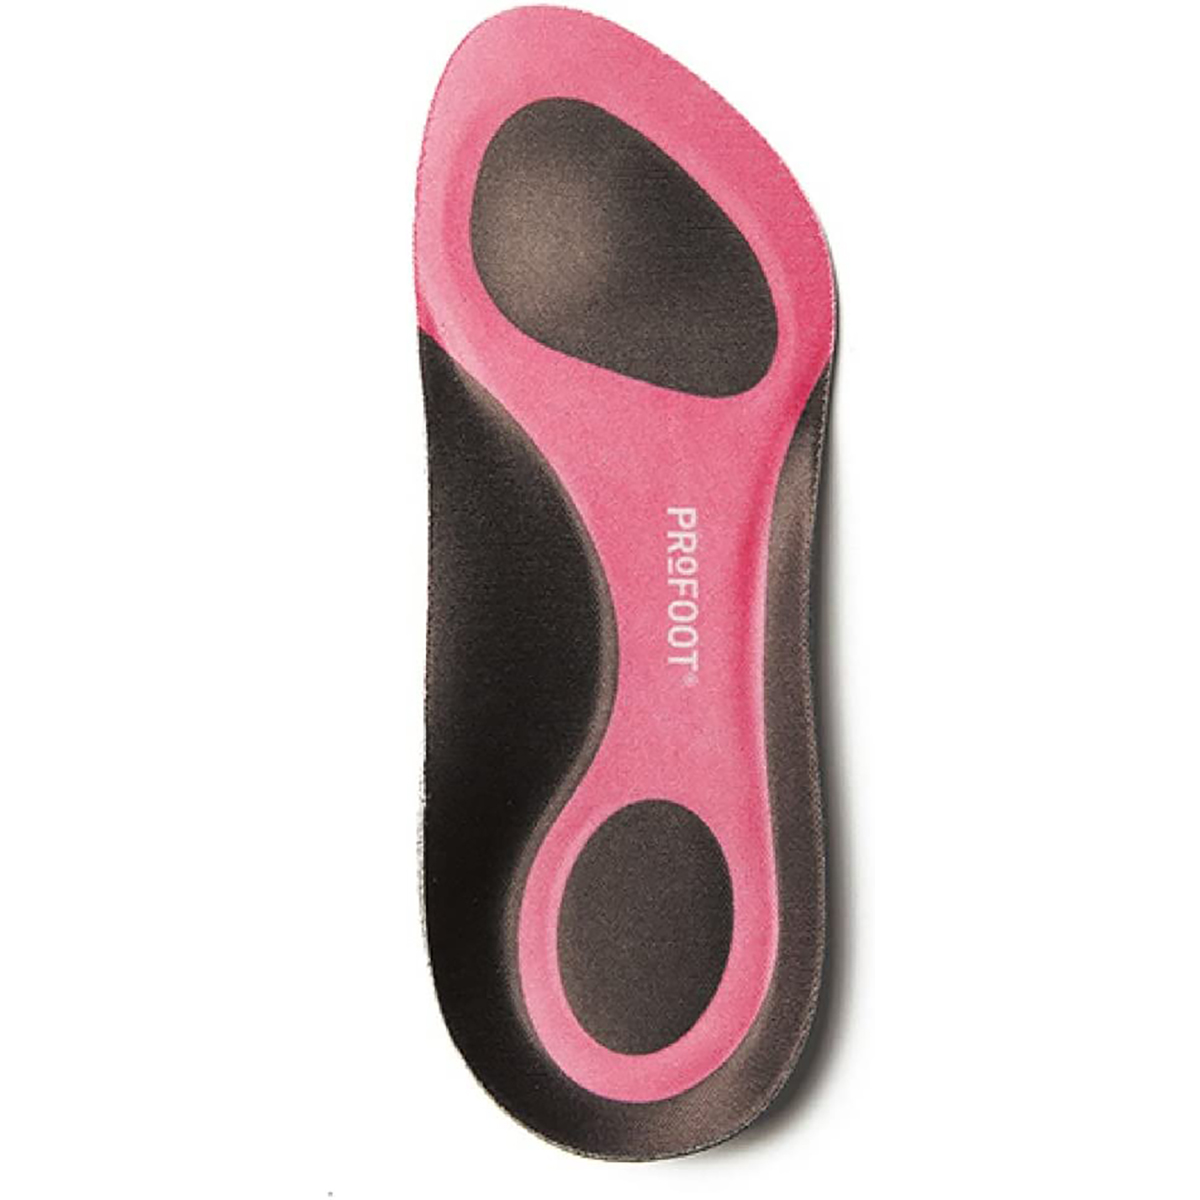 Triad Orthotic 3 Zone Insoles Womens